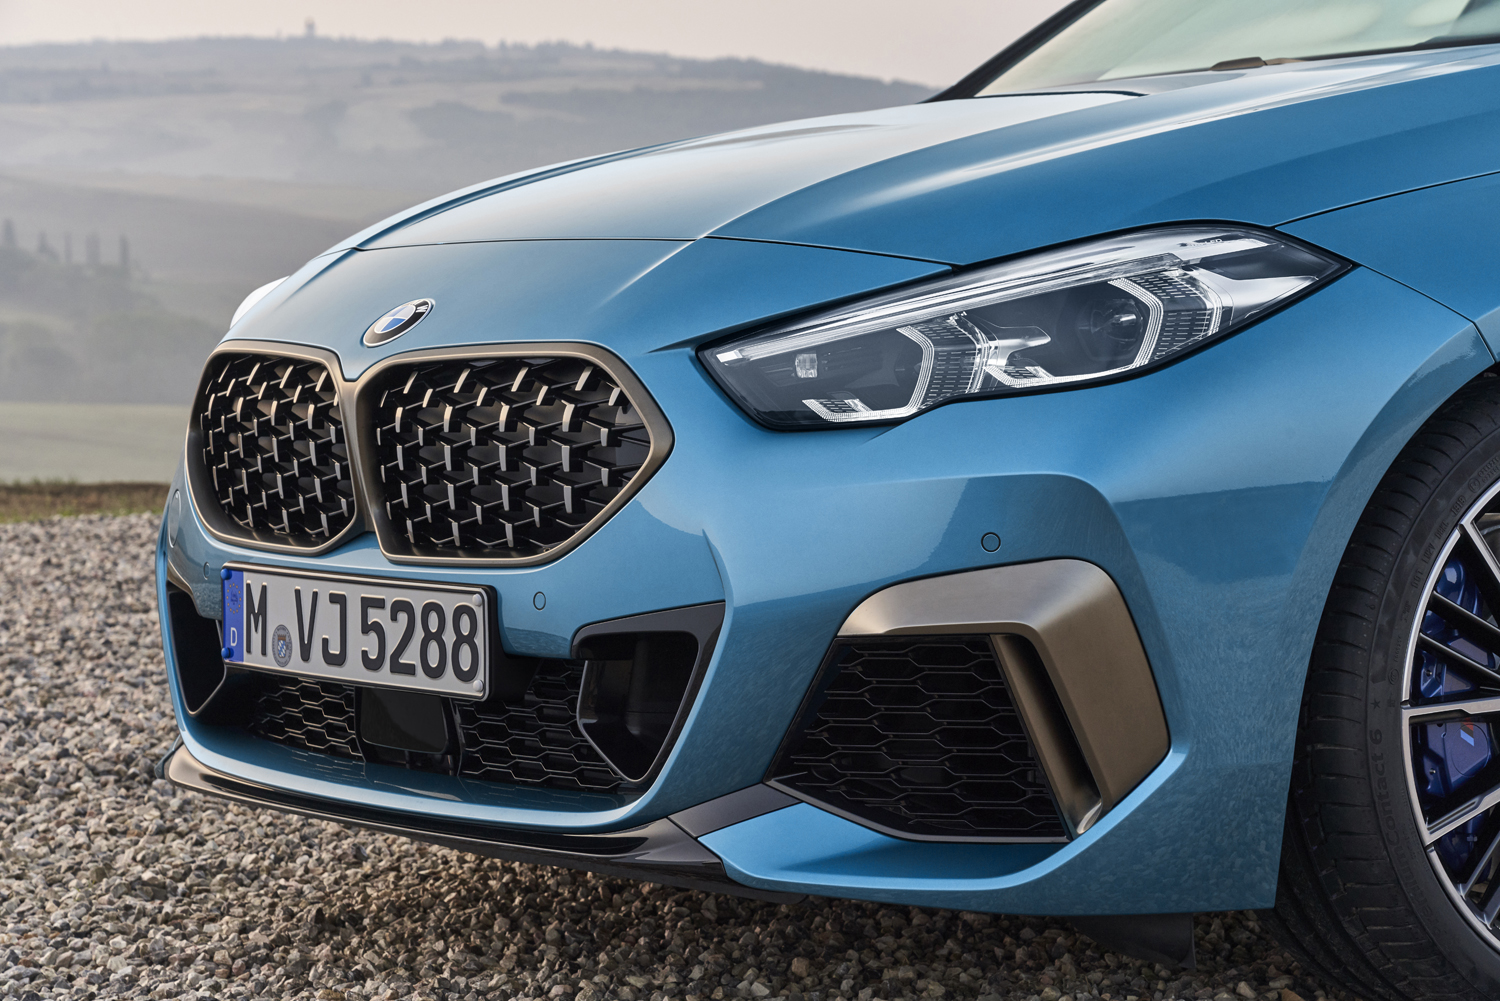 2020 bmw 228i m235i gran coupe unveiled as entry level sedans 2 series gc off 8